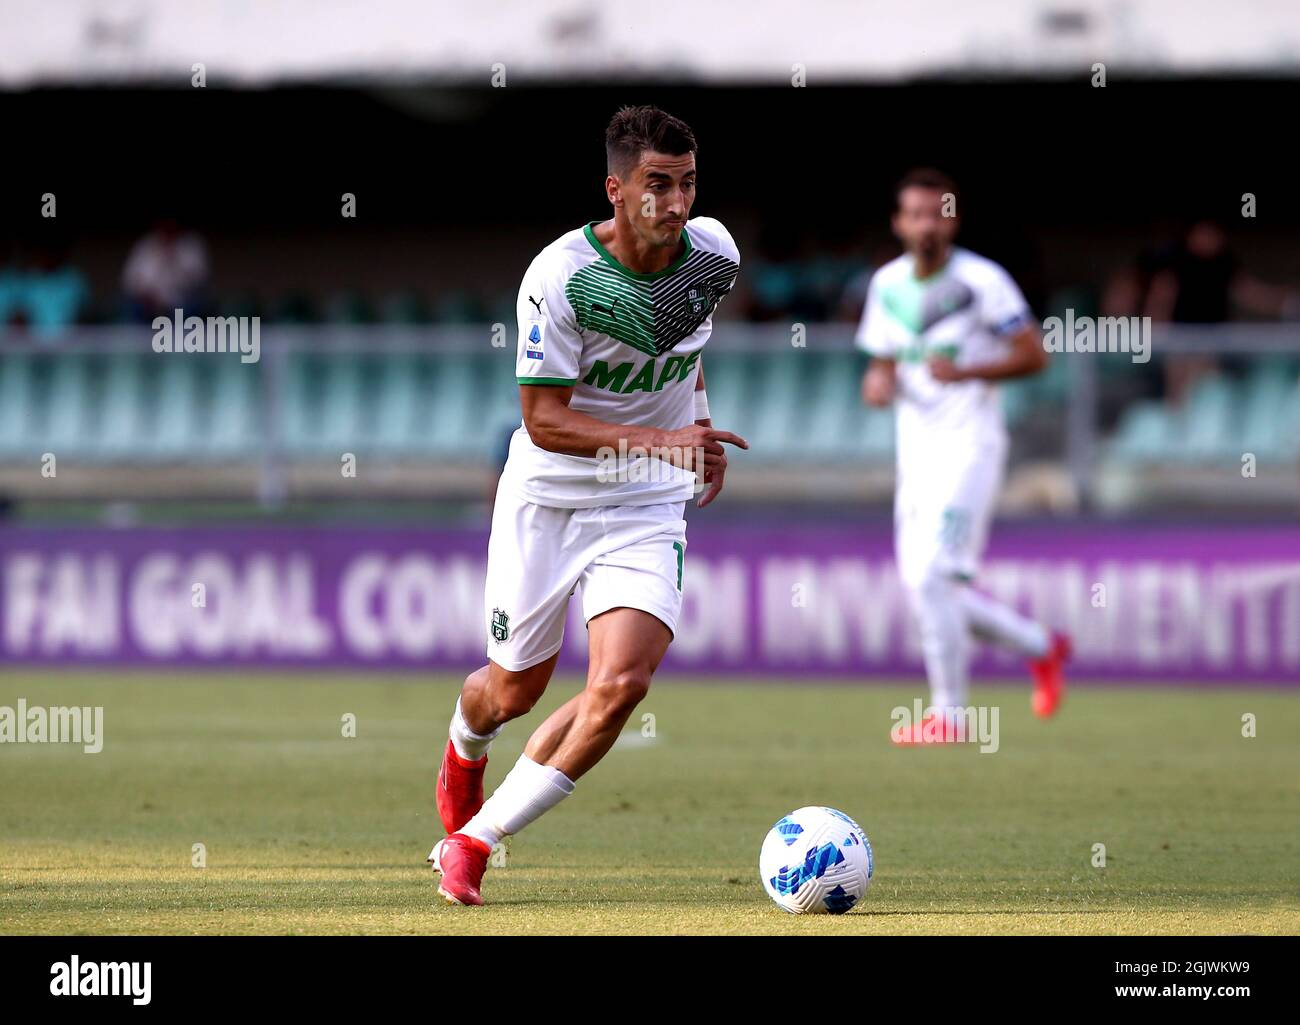 VERONA, ITALY - AUGUST 21: Filip Djuricic of US Sassuolo in action ,during the Serie A match between Hellas Verona FC v US Sassuolo at Stadio Marcantonio Bentegodi on August 21, 2021 in Verona, Italy. (Photo by MB Media) Stock Photo